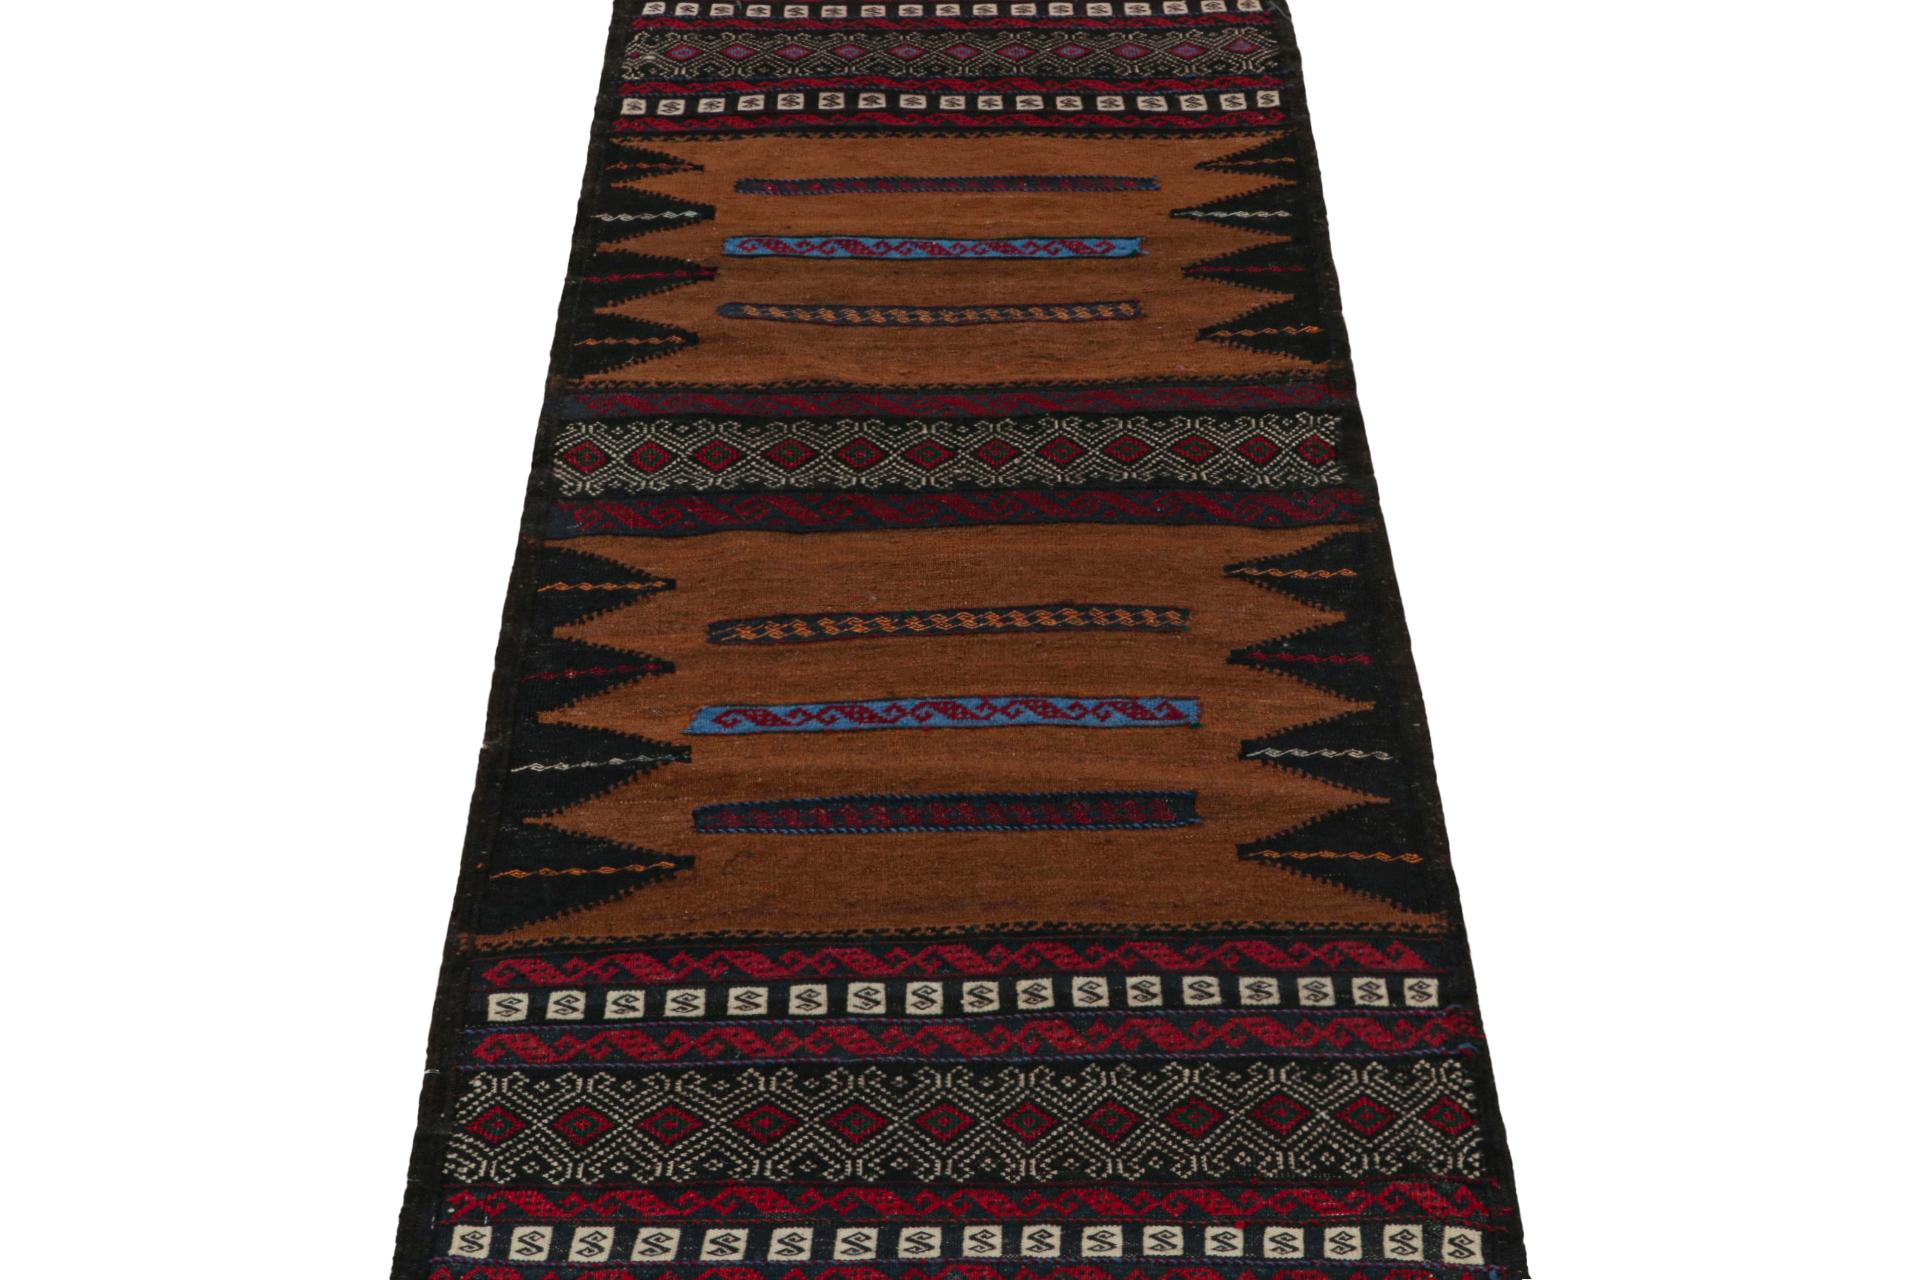 Tribal Vintage Afghan Baluch Kilim Runner Rug, with Geometric Patterns from Rug & Kilim For Sale